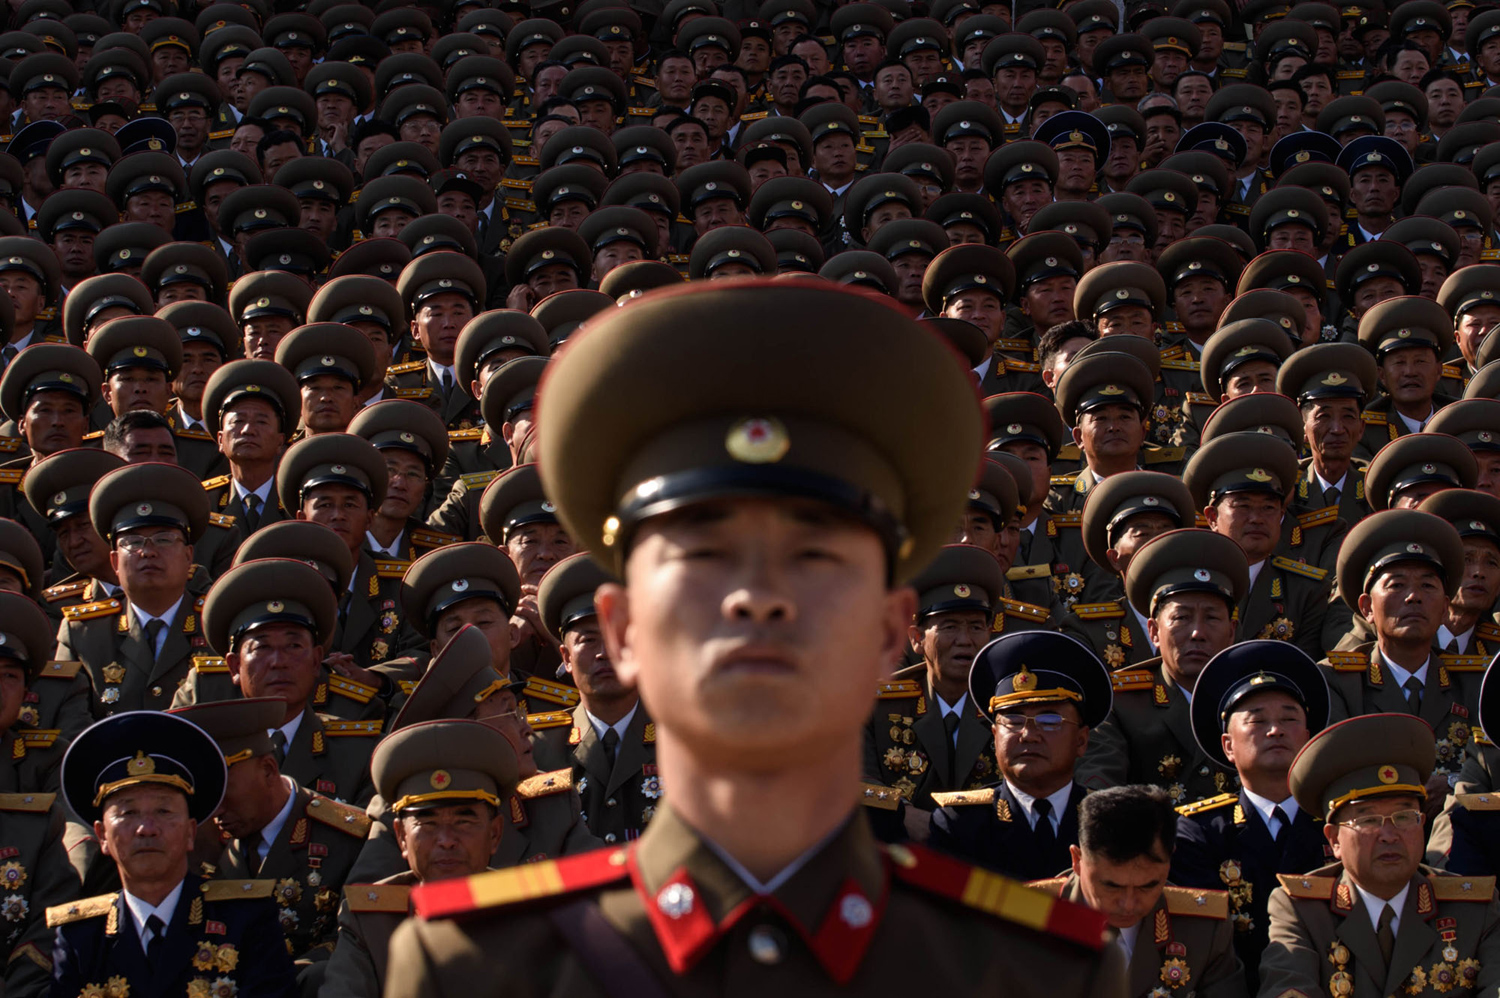 North Korea Marks 70 Years of Workers’ Party Rule 11